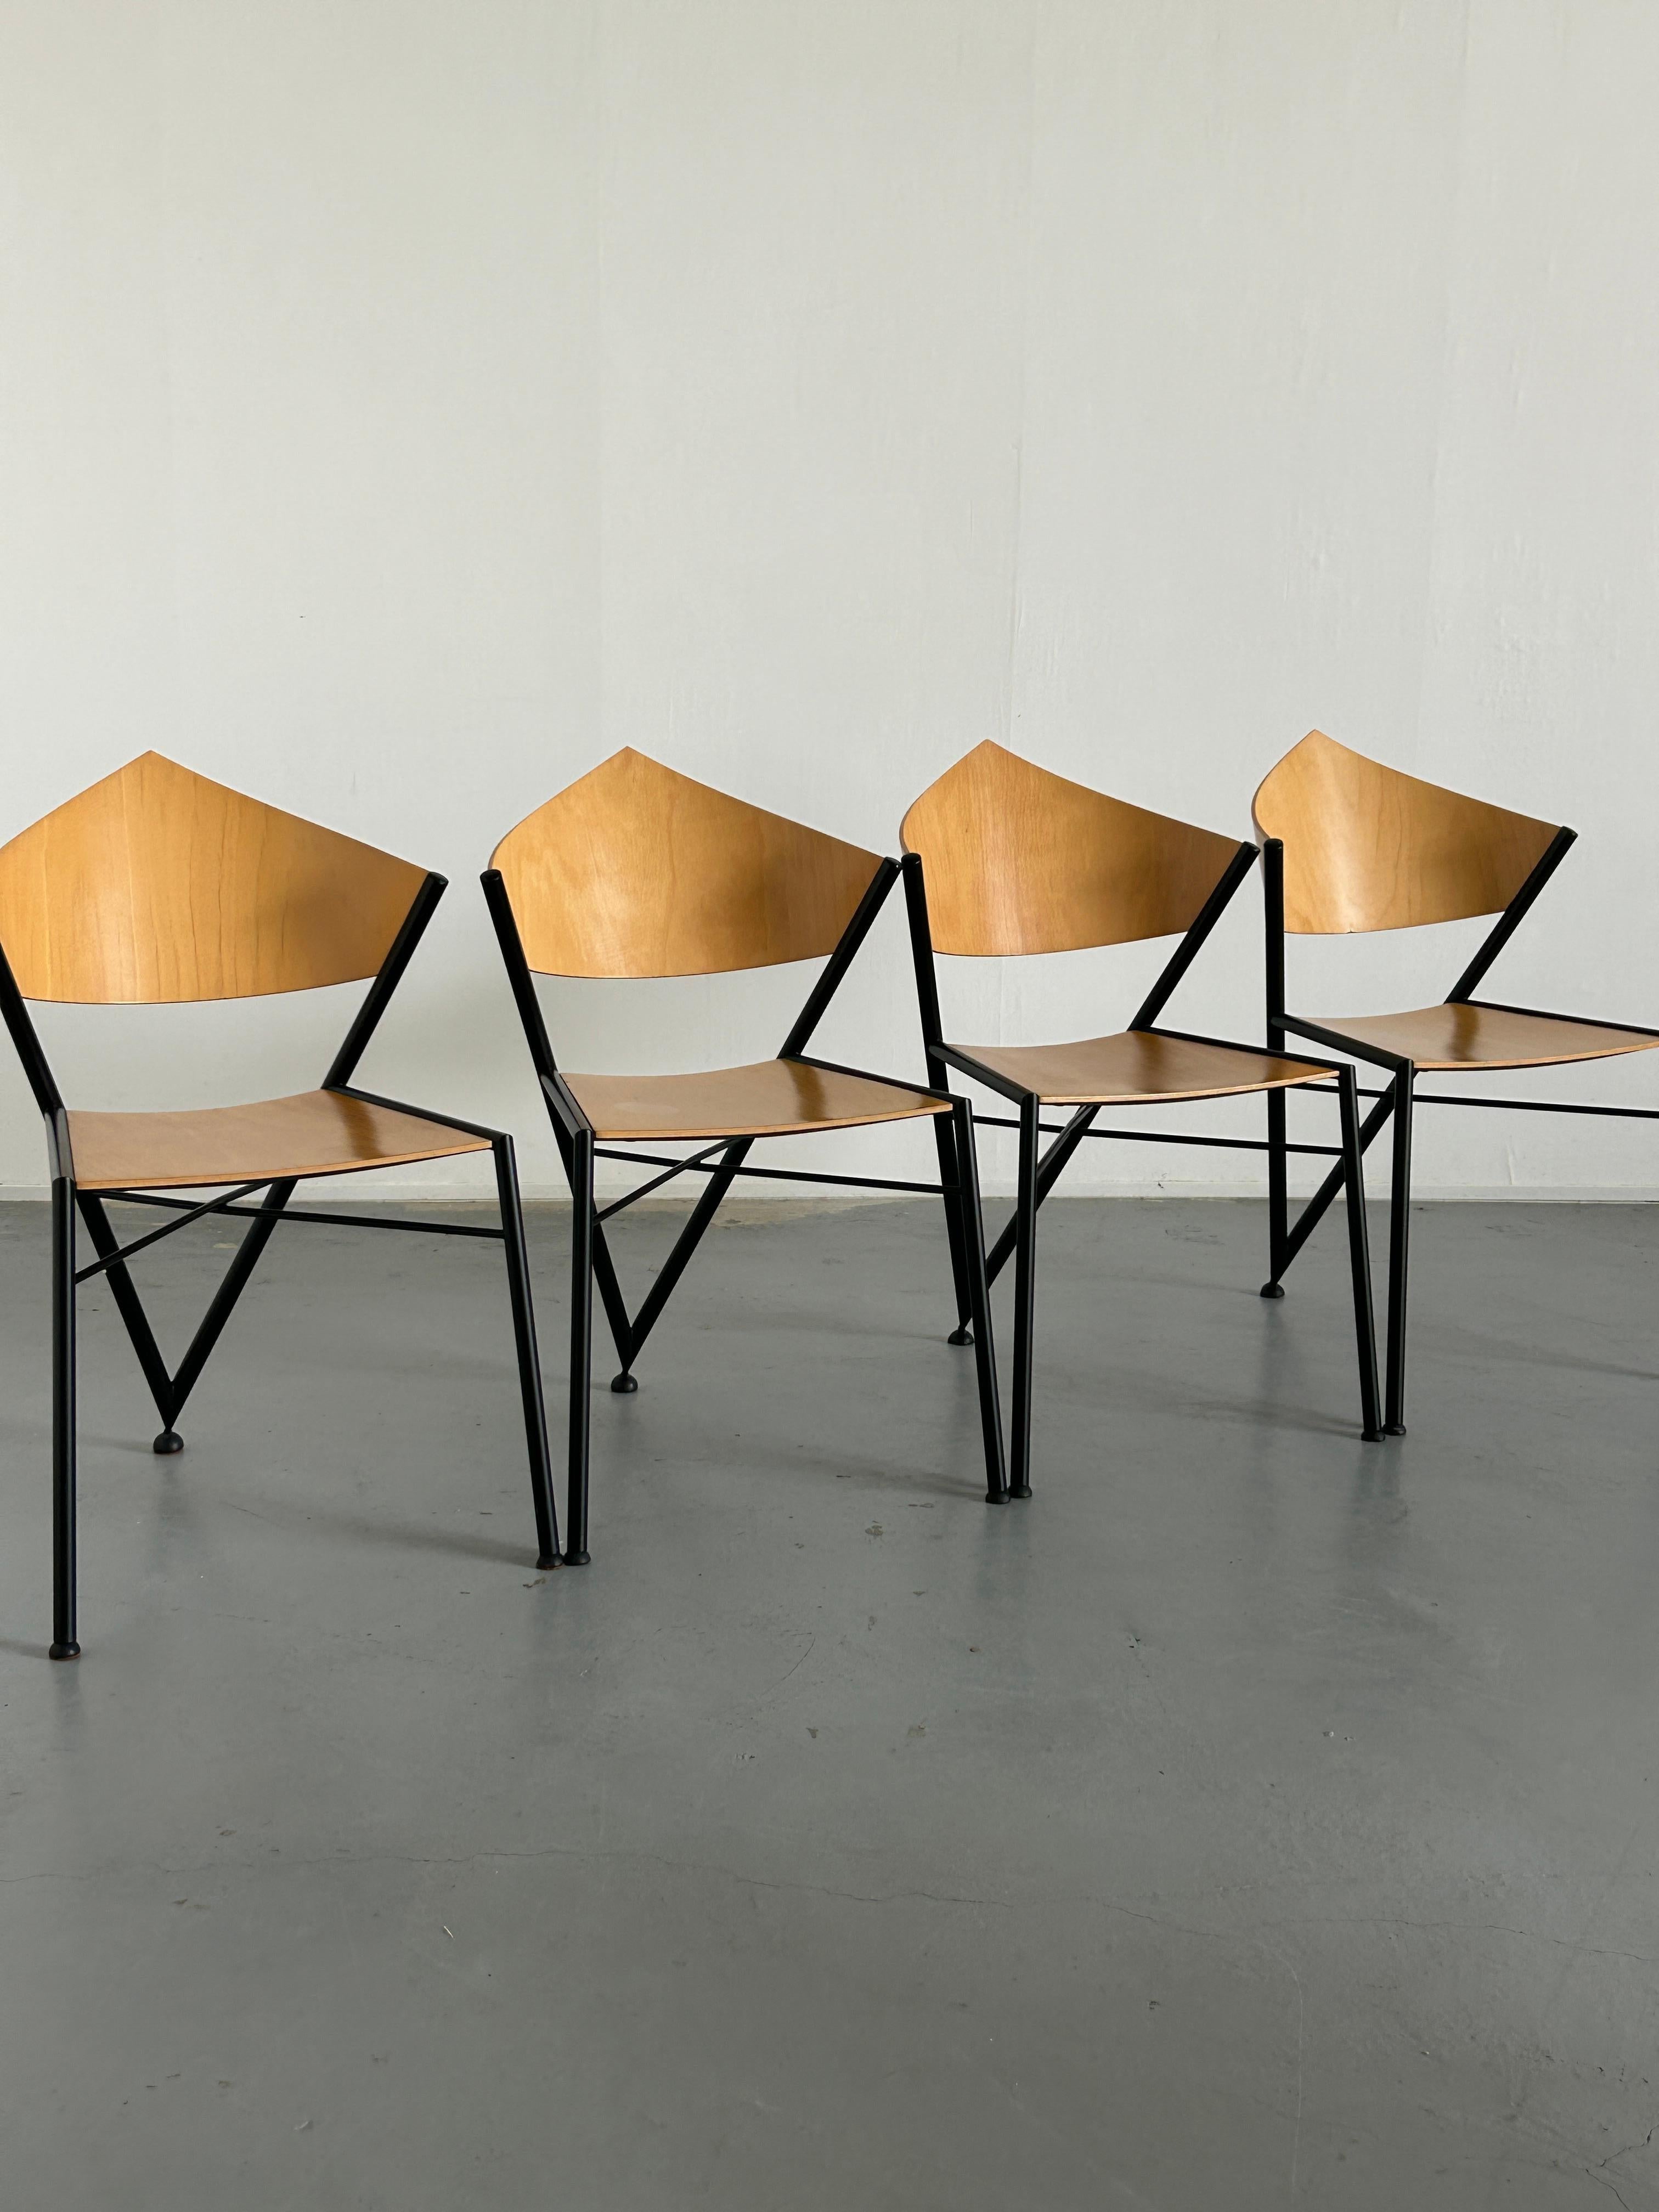 1 of 6 Postmodern Metal Framed Plywood Chairs, Memphis Design, 1980s Italy 4